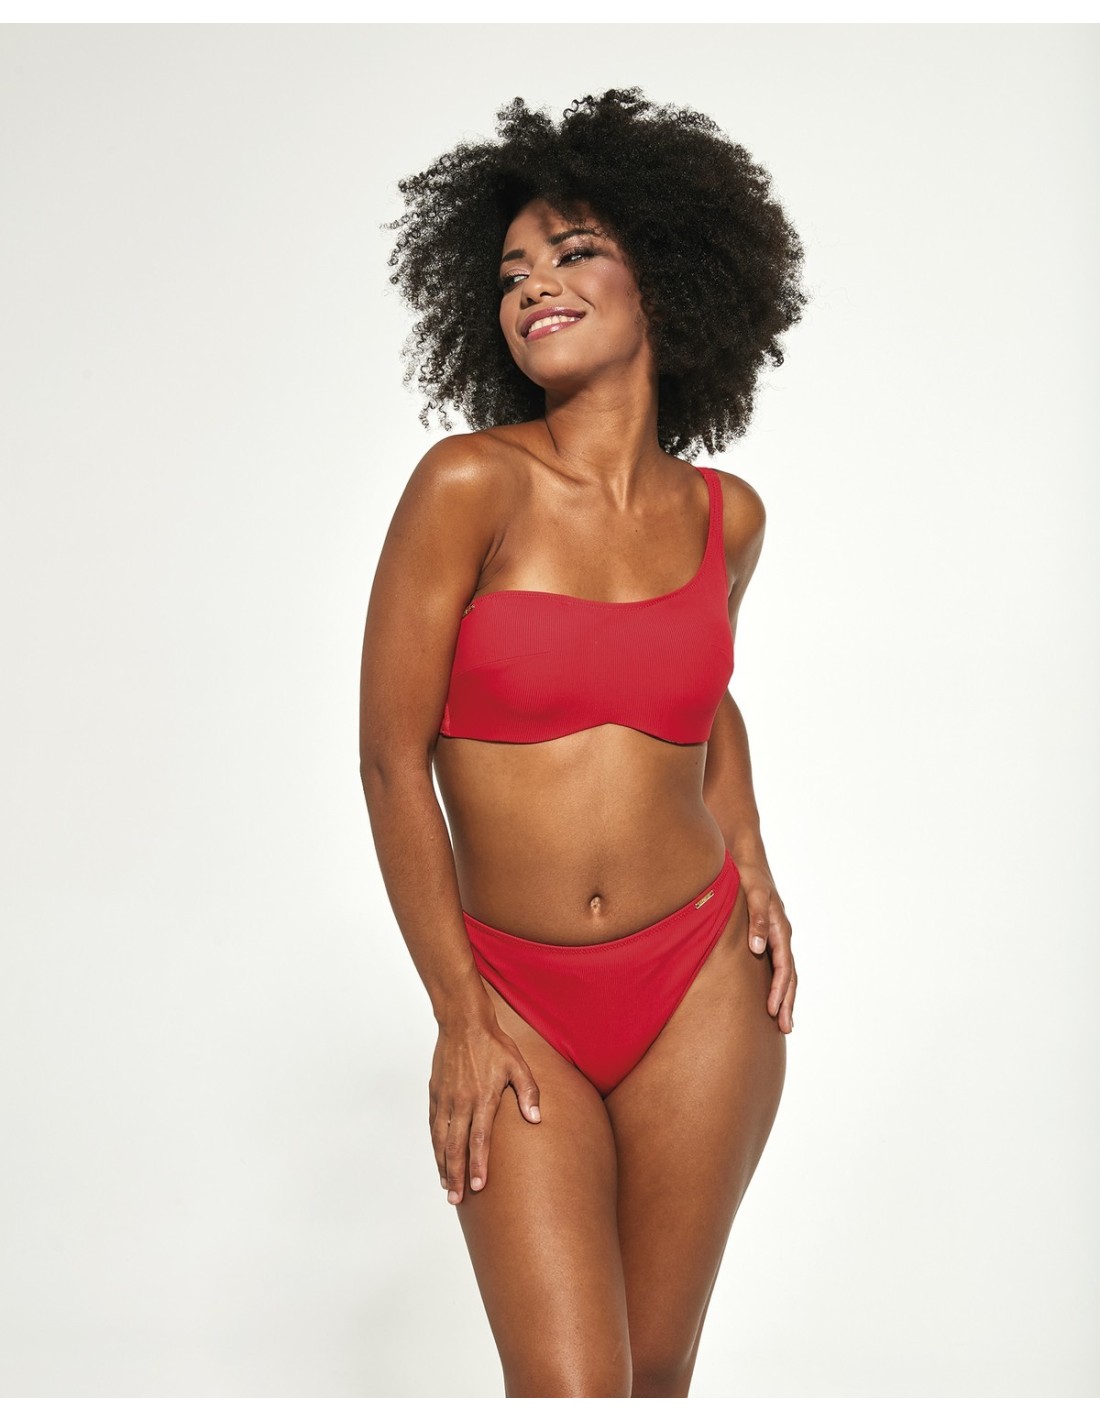 Plus Size Swimsuit Bra with Large Soft Cups and Underwire with